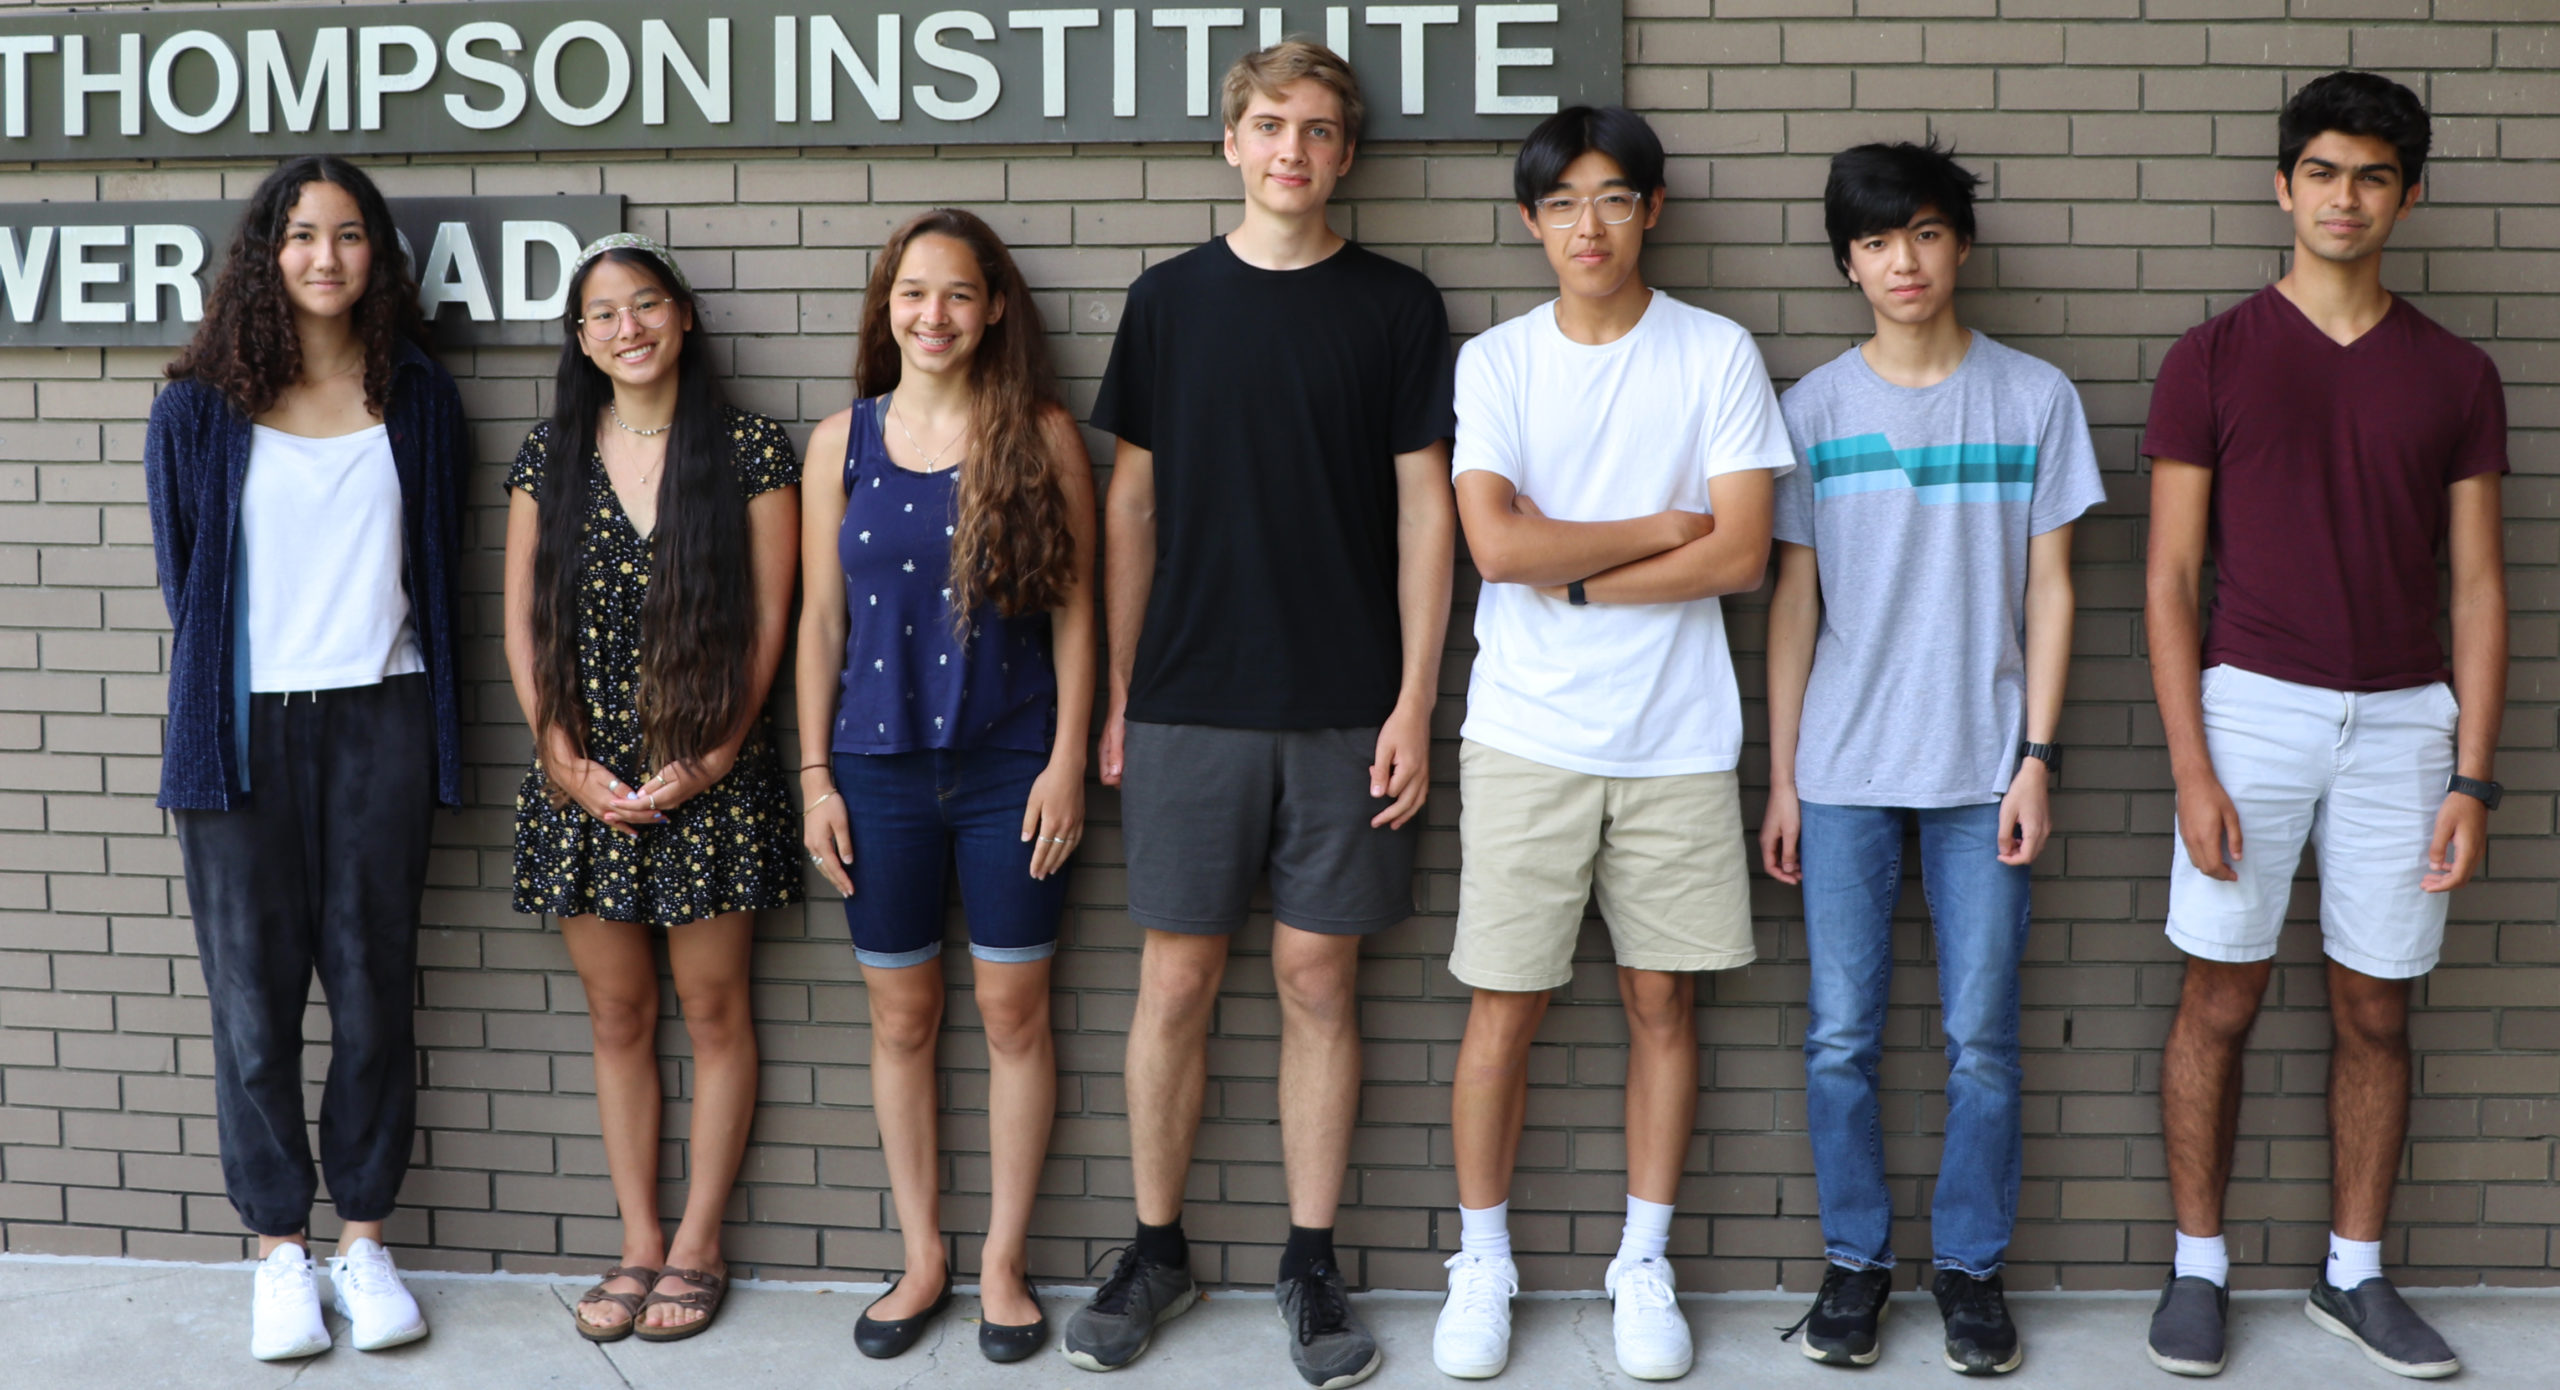 A group photo of 7 high school interns during orientation outside in front of BTI.